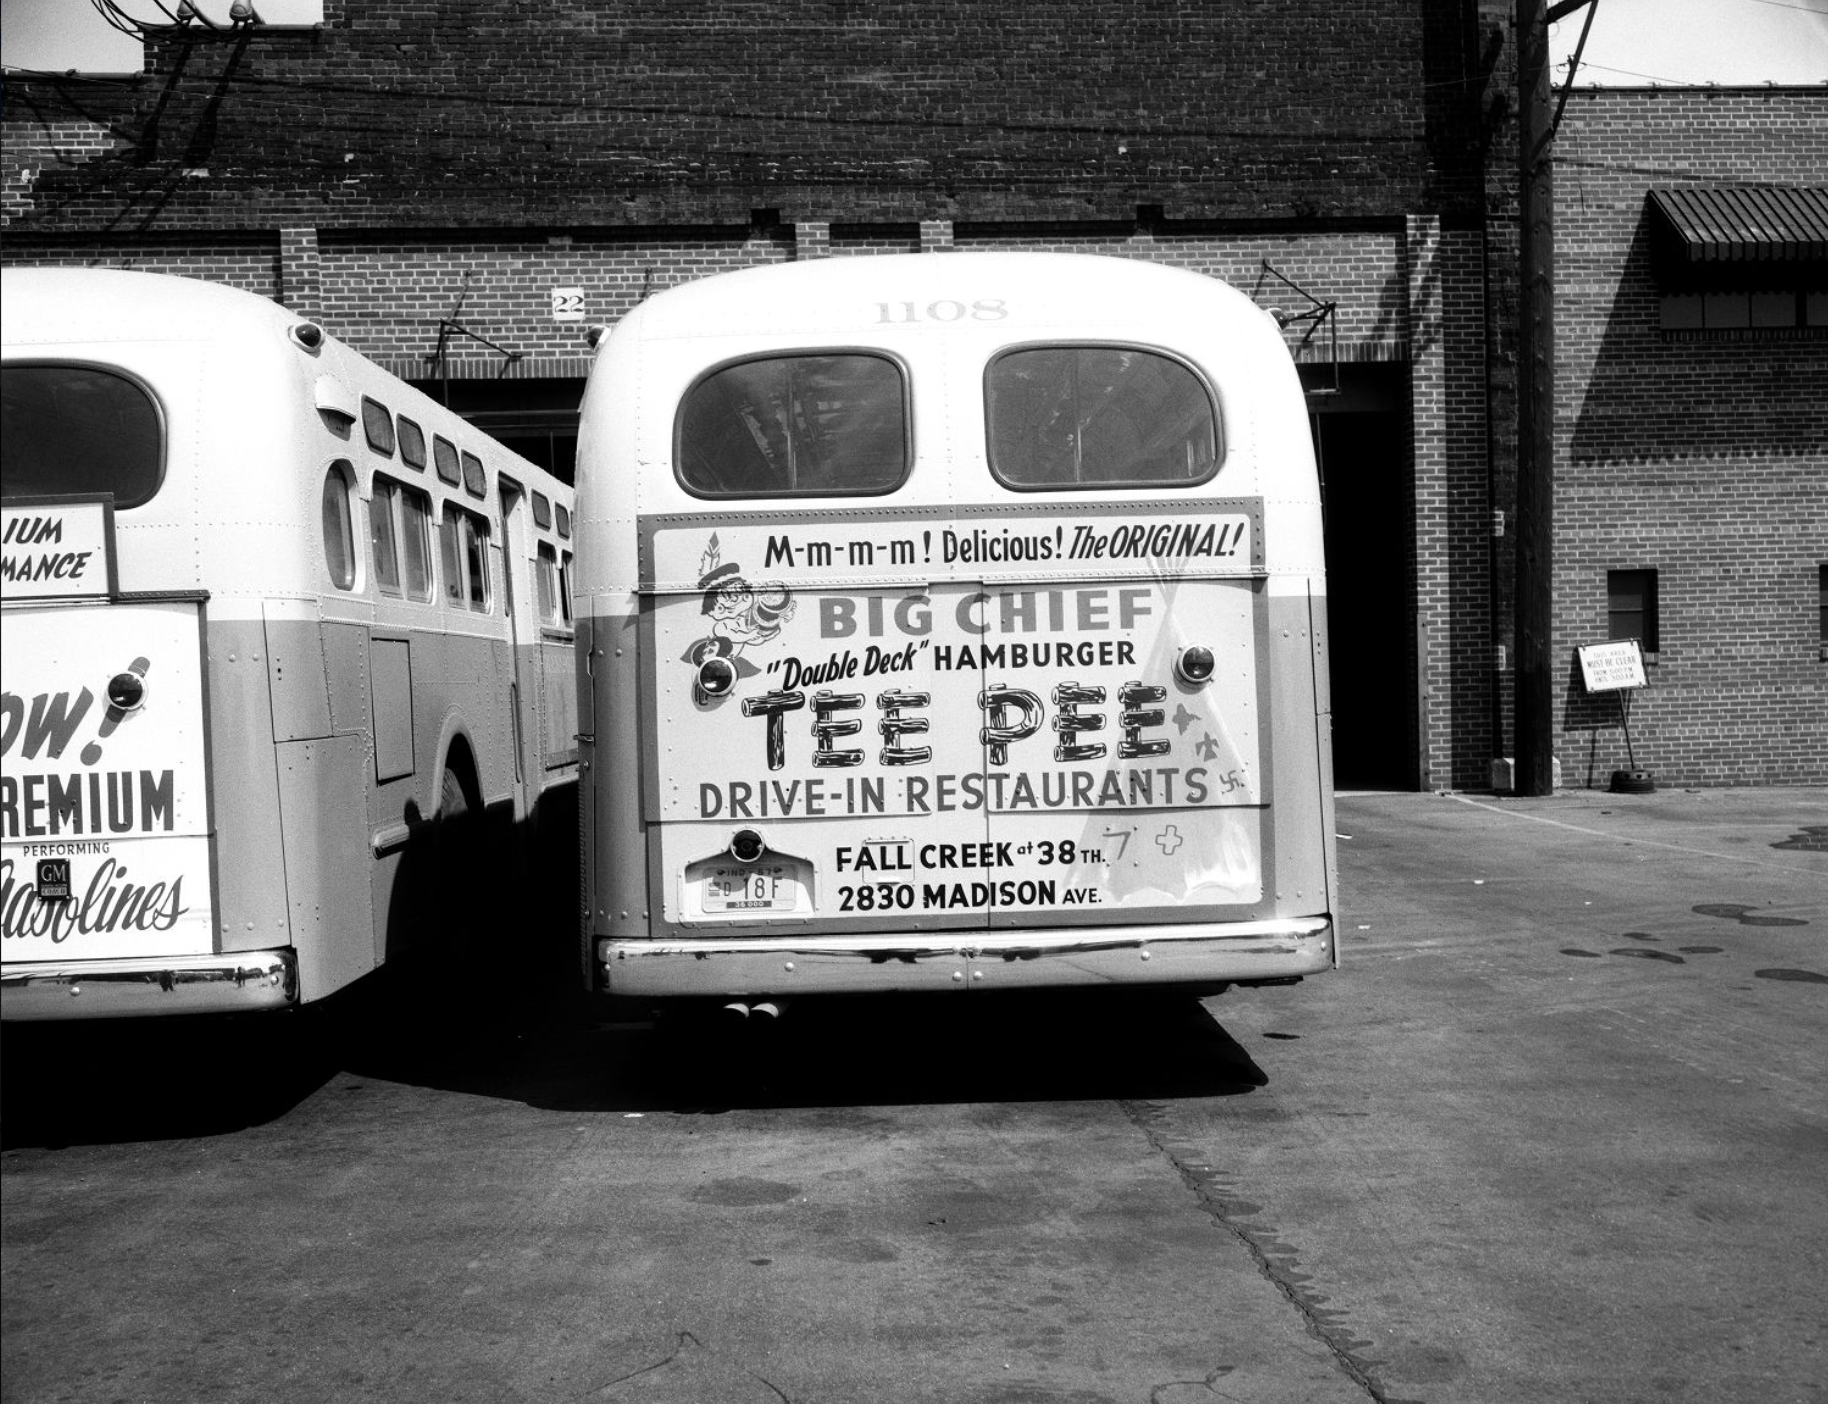 A advertisement on the back of a bus features the Tee Pee Restaurant logo and a caricature of a Native American.